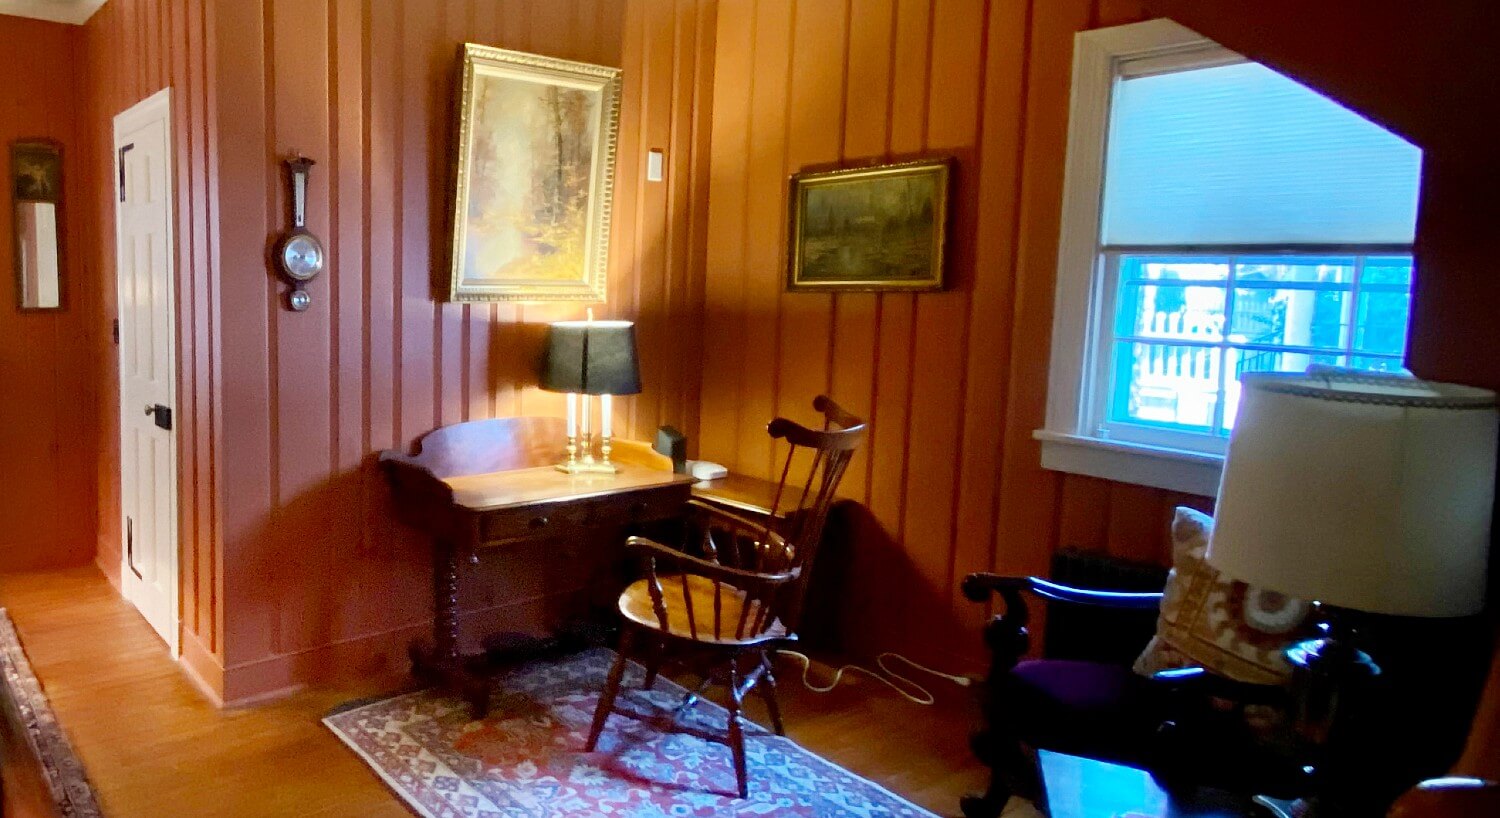 Corner nook of home with wood paneled walls, a writing desk with chair and lamp and one window with blinds